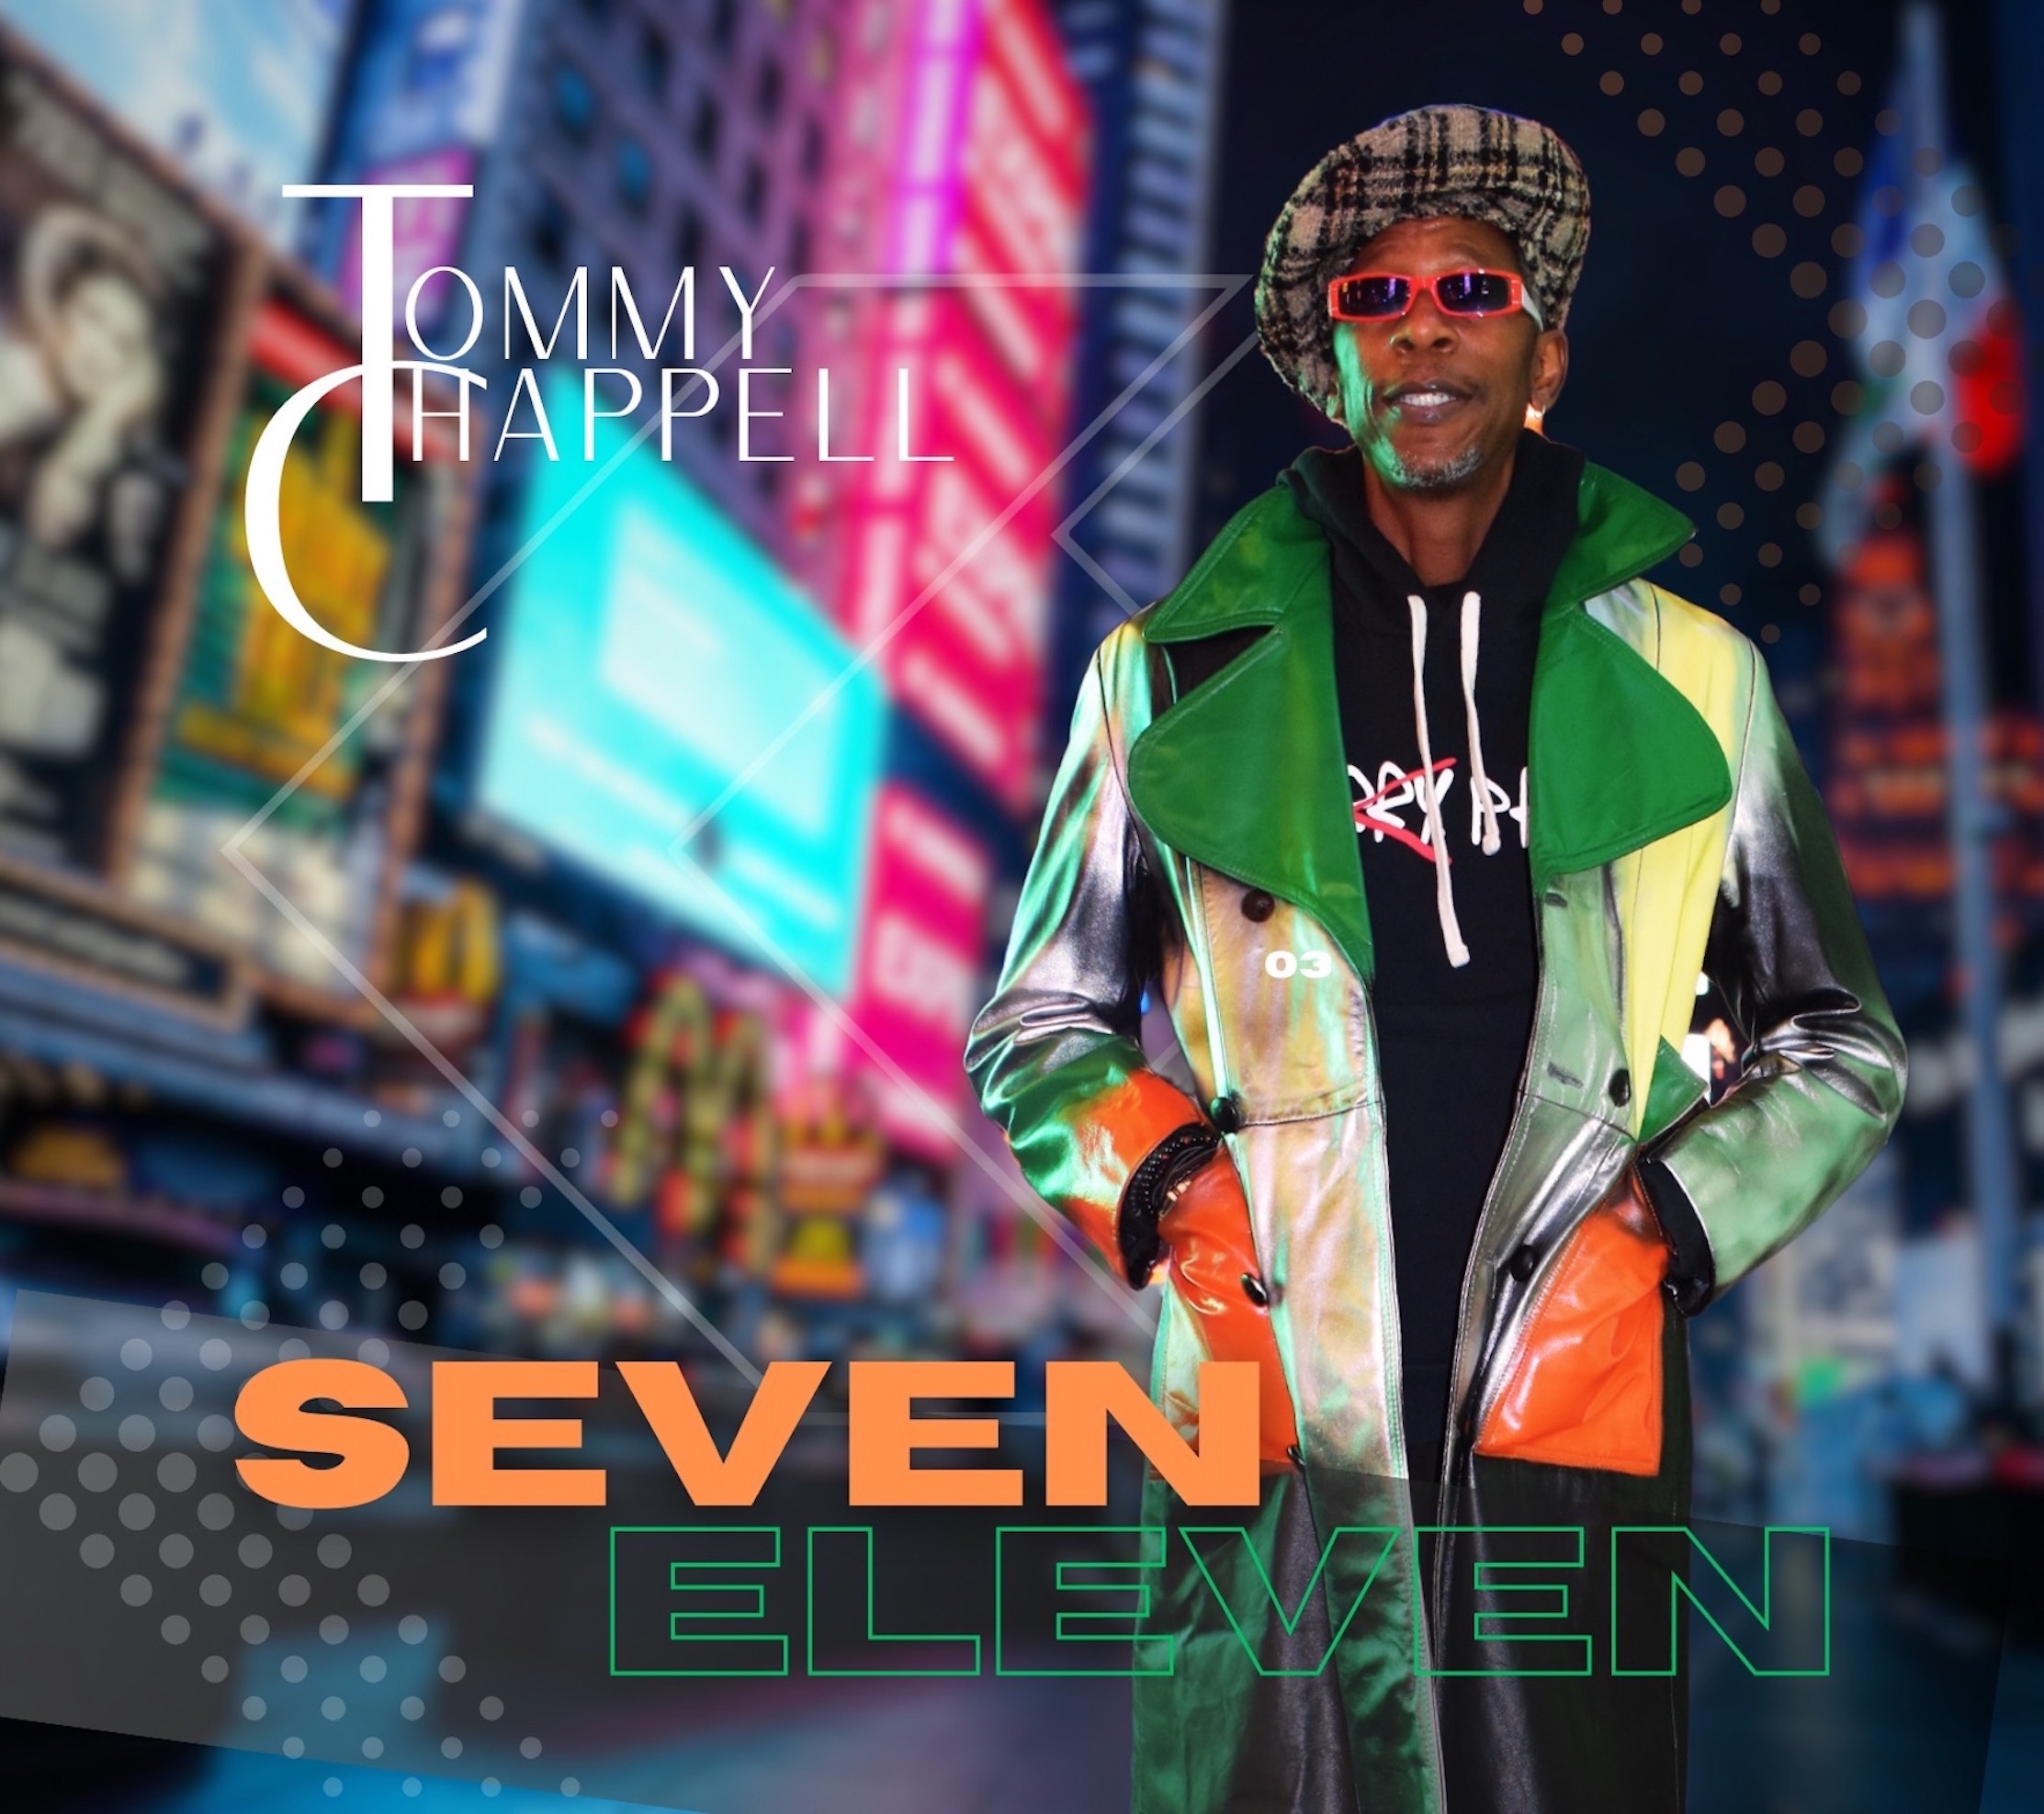 A Soul-Stirring Voyage through Resilience, Love, and Magic – Tommy Chappell Presents “Seven Eleven”